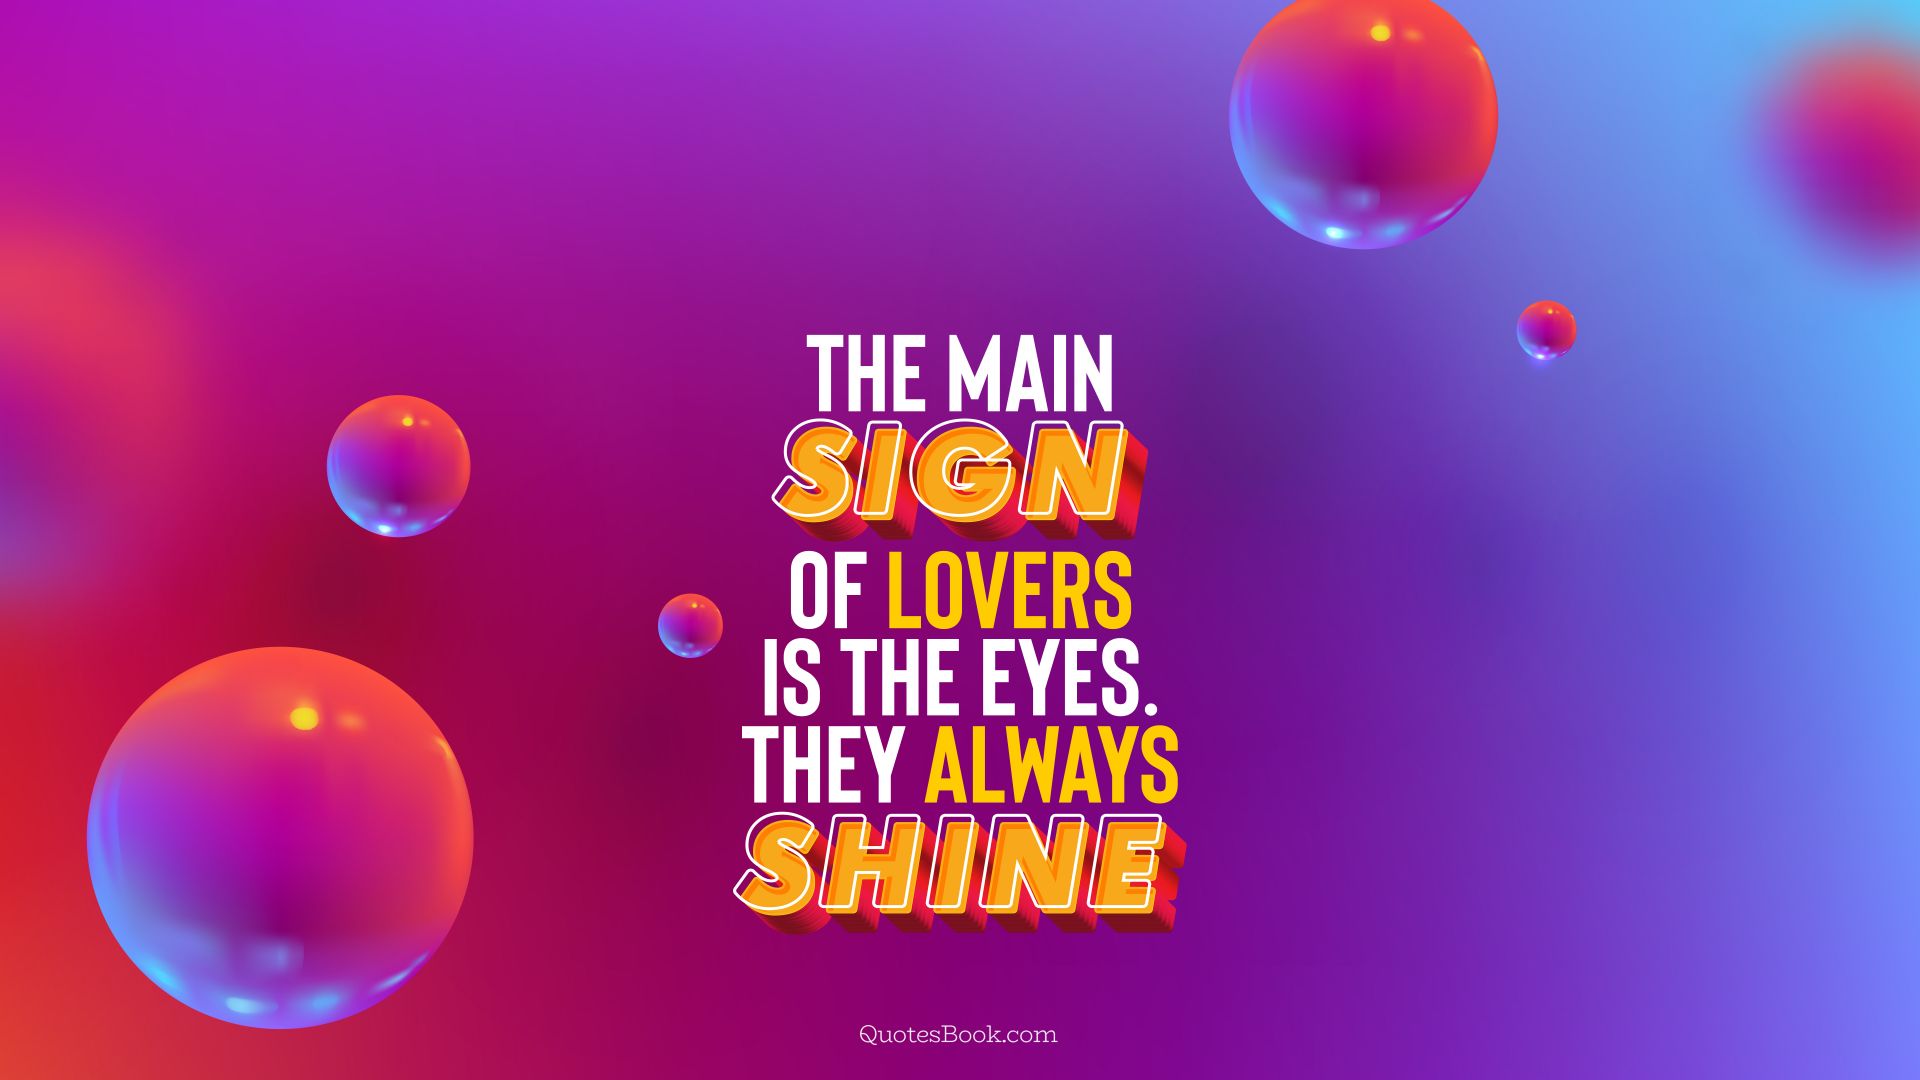 The main sign of lovers is the eyes. They always shine. - Quote by QuotesBook